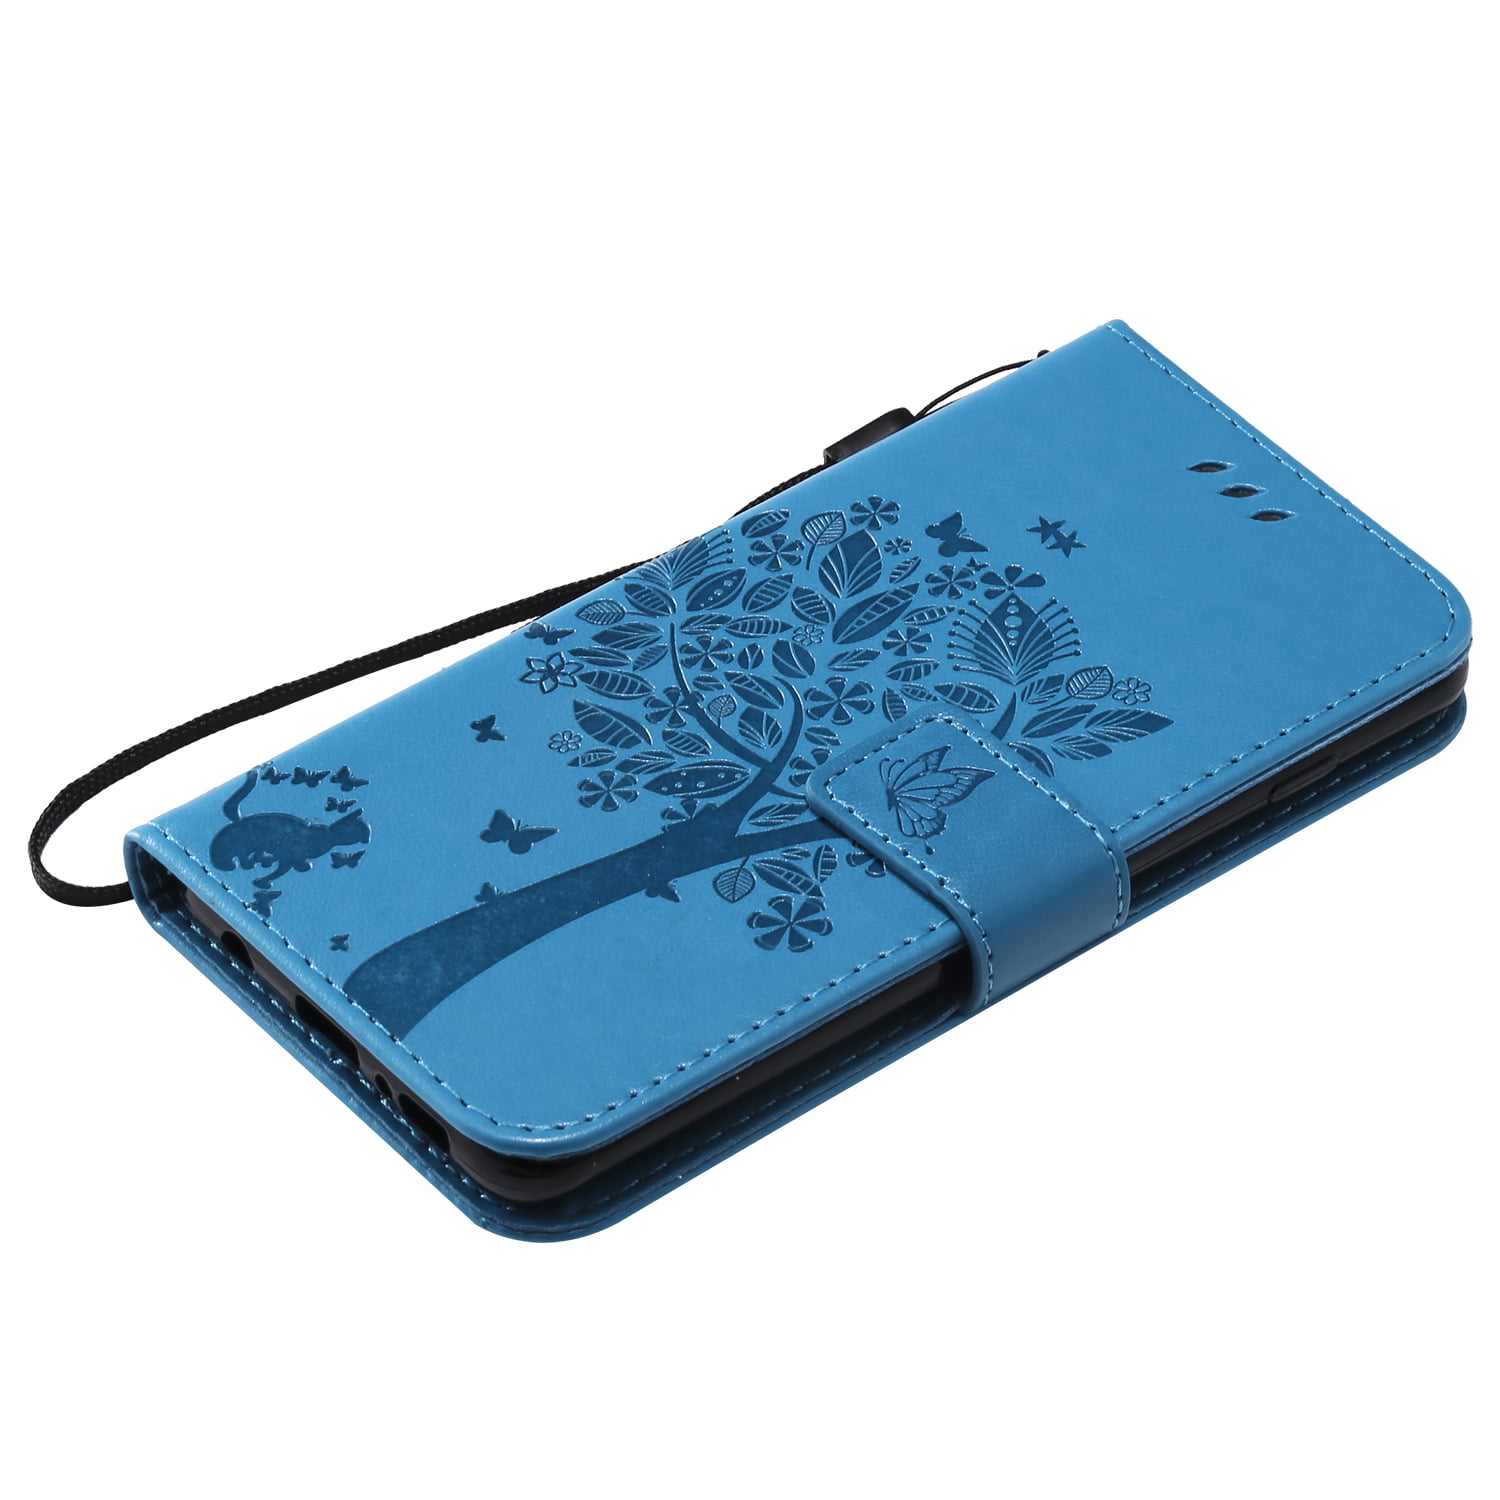 Embossed Tree PU Leather Shockproof Flip Wallet Cover with TPU Card Slots Magnetic Closure Stand Function Folio Notebook Protective Skin,Blue Vagenno Samsung Galaxy S10 Case 